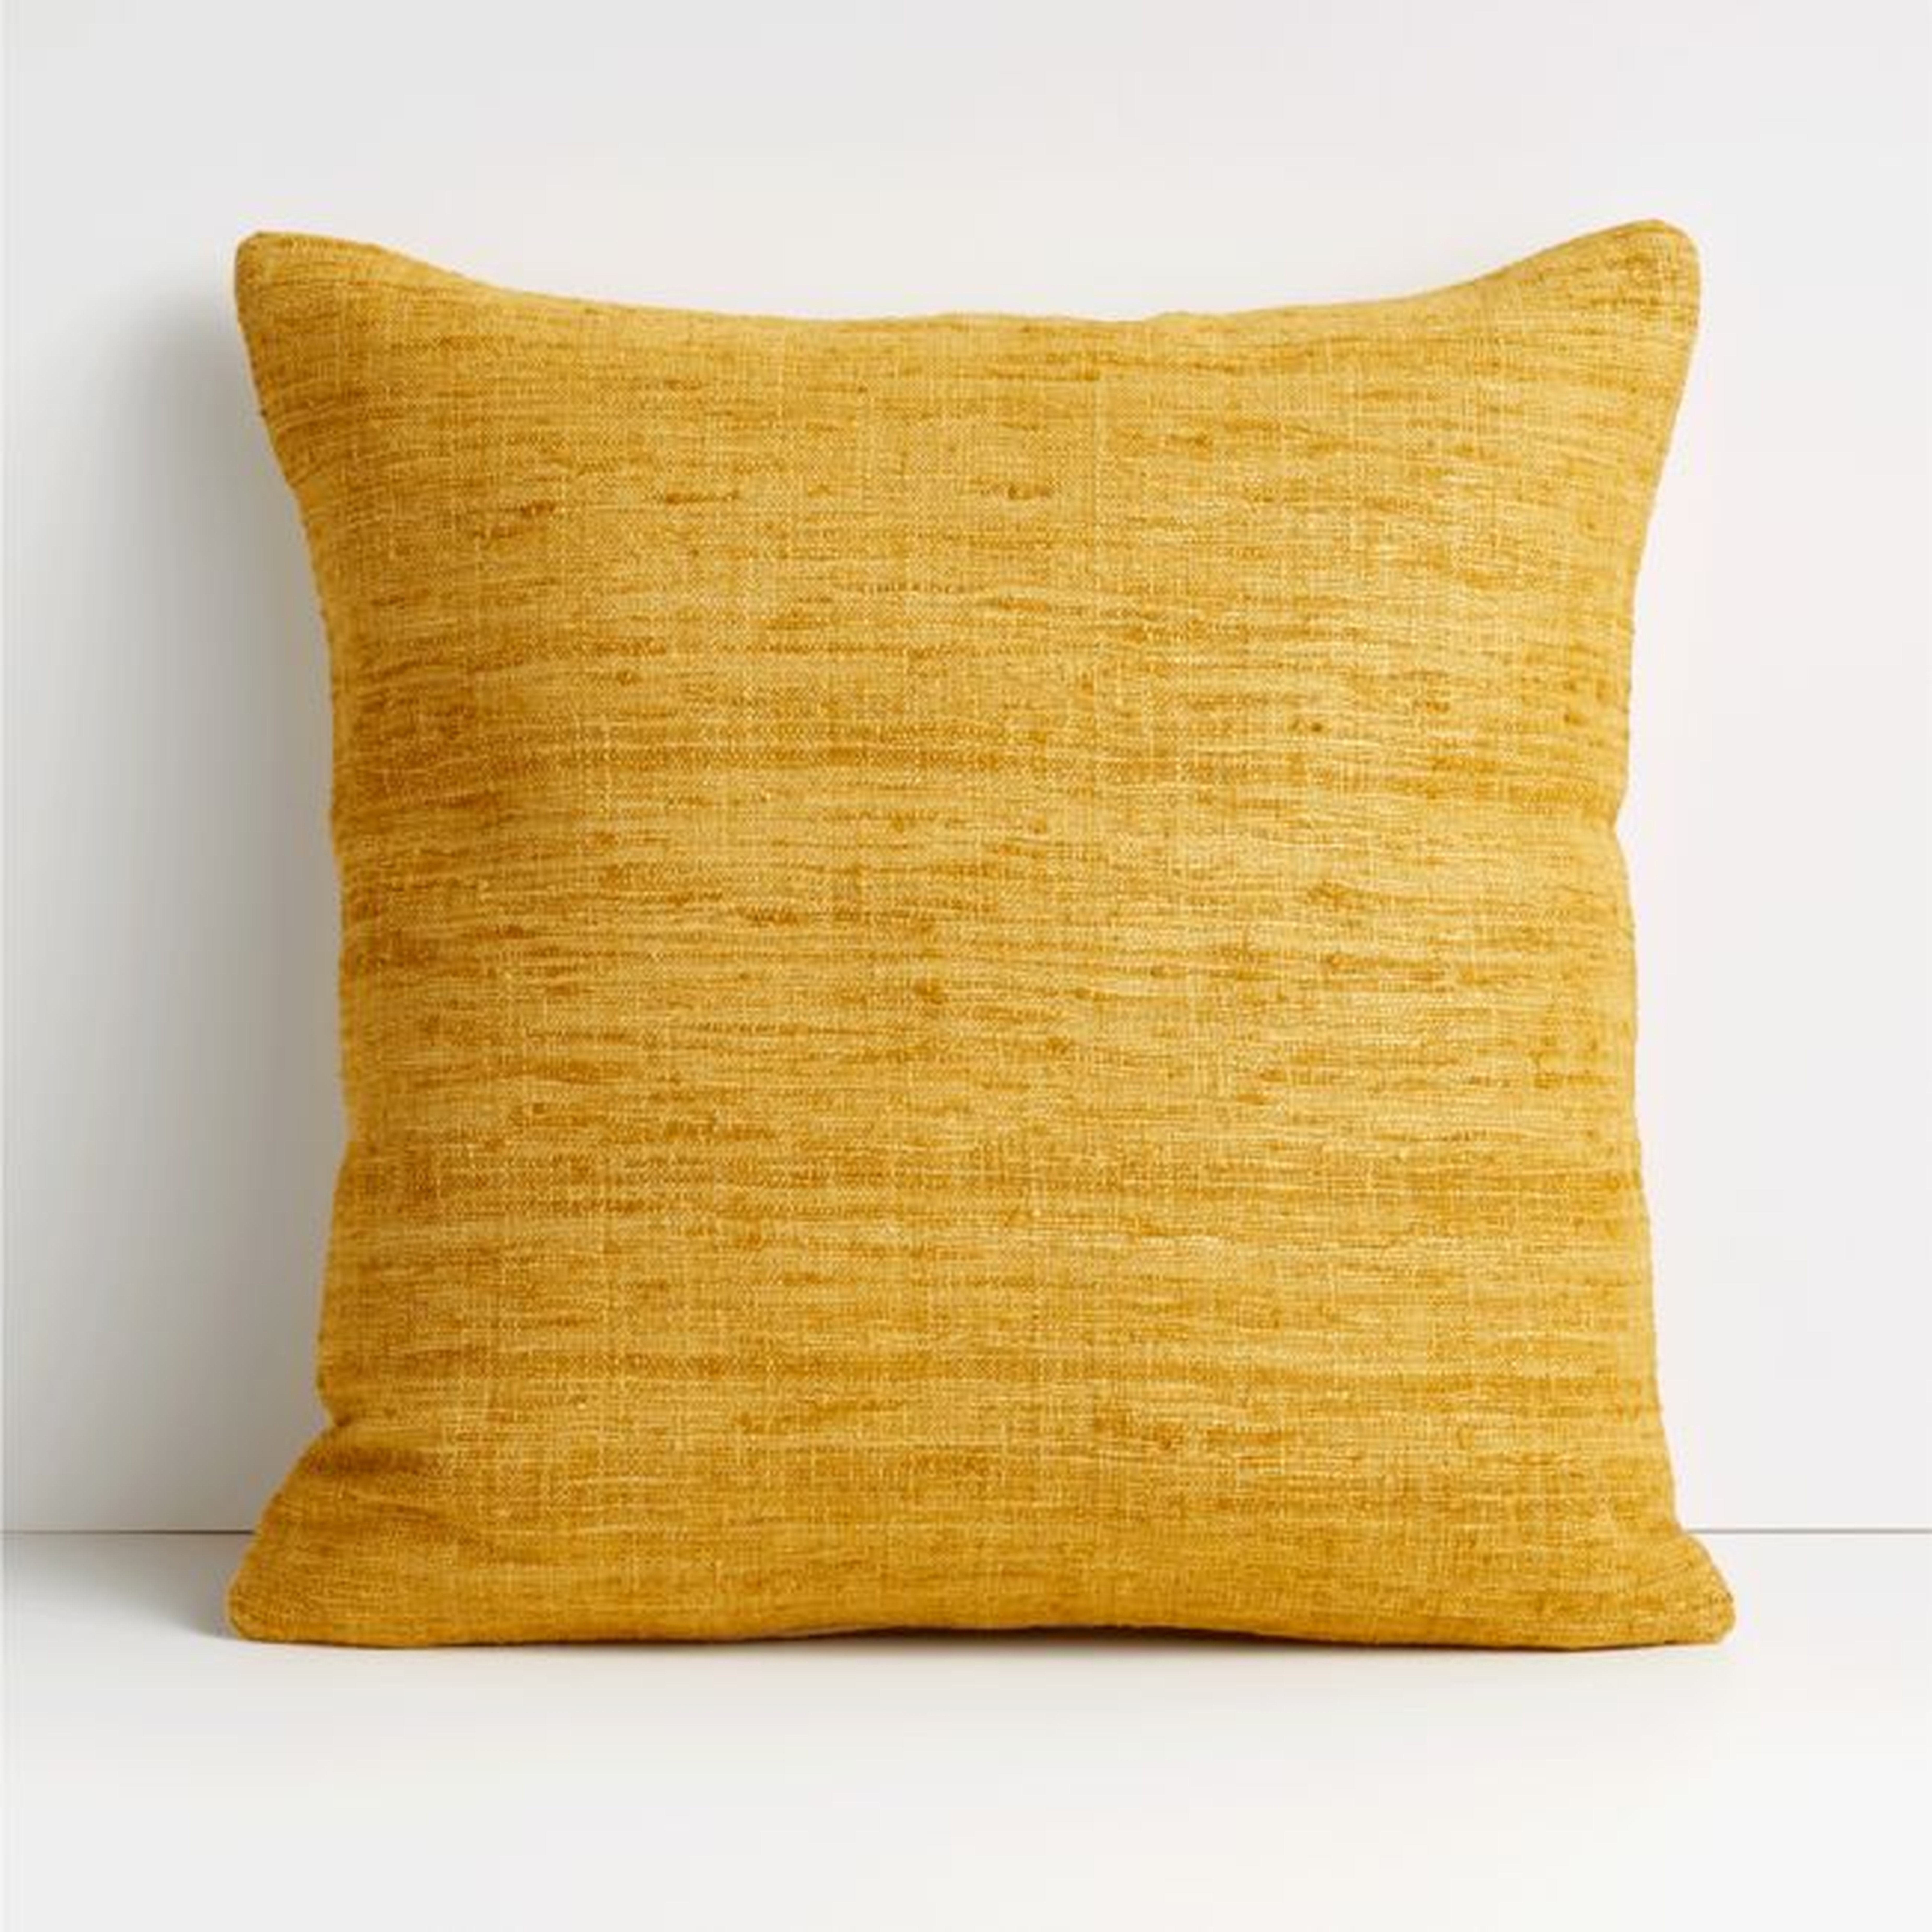 Yellow 20"x20" Cotton Sari Silk Throw Pillow with Feather Insert - Crate and Barrel